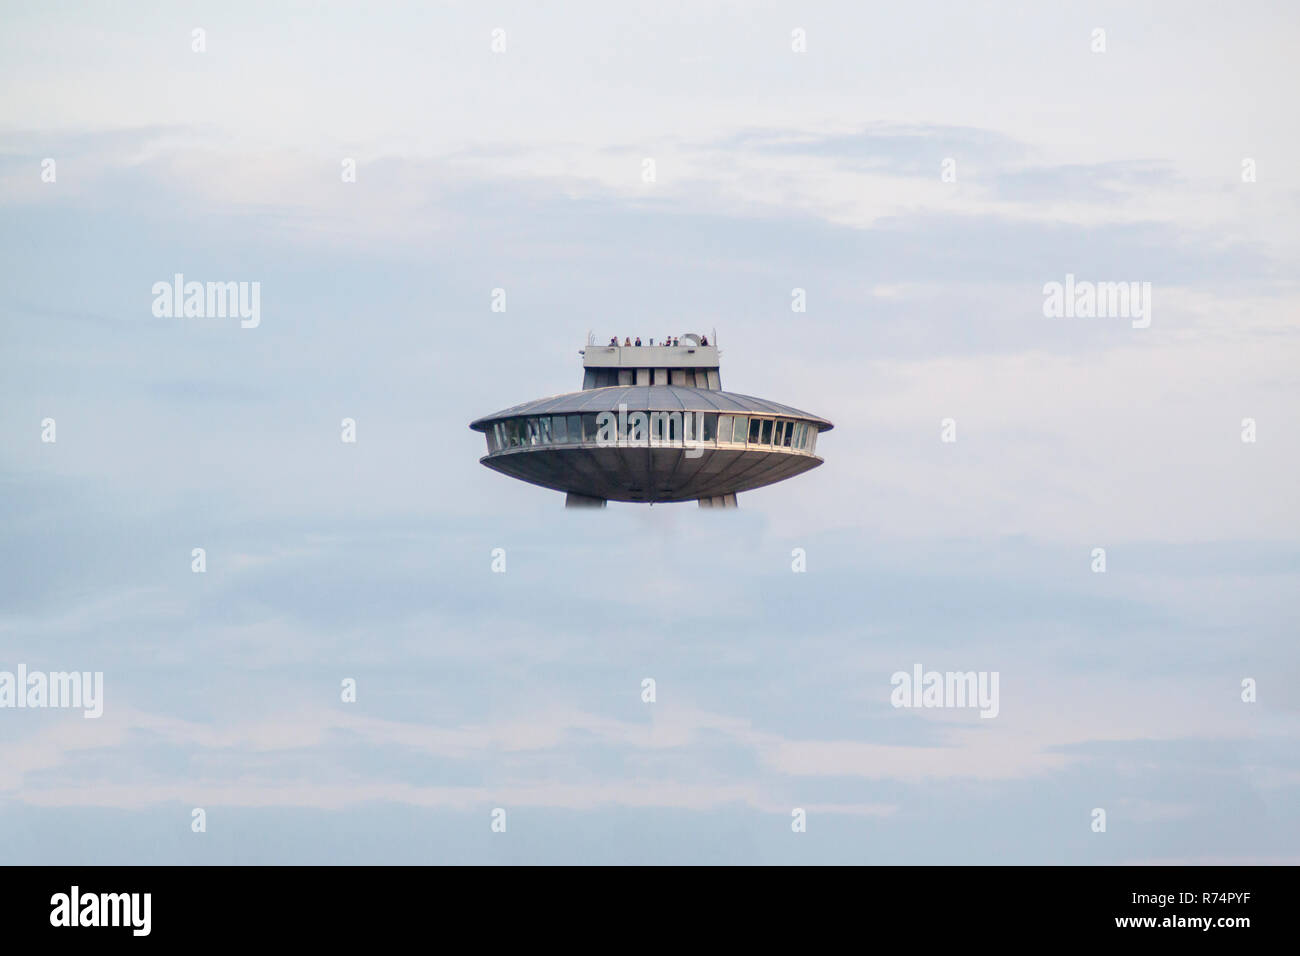 UFO ship with aliens on board Stock Photo